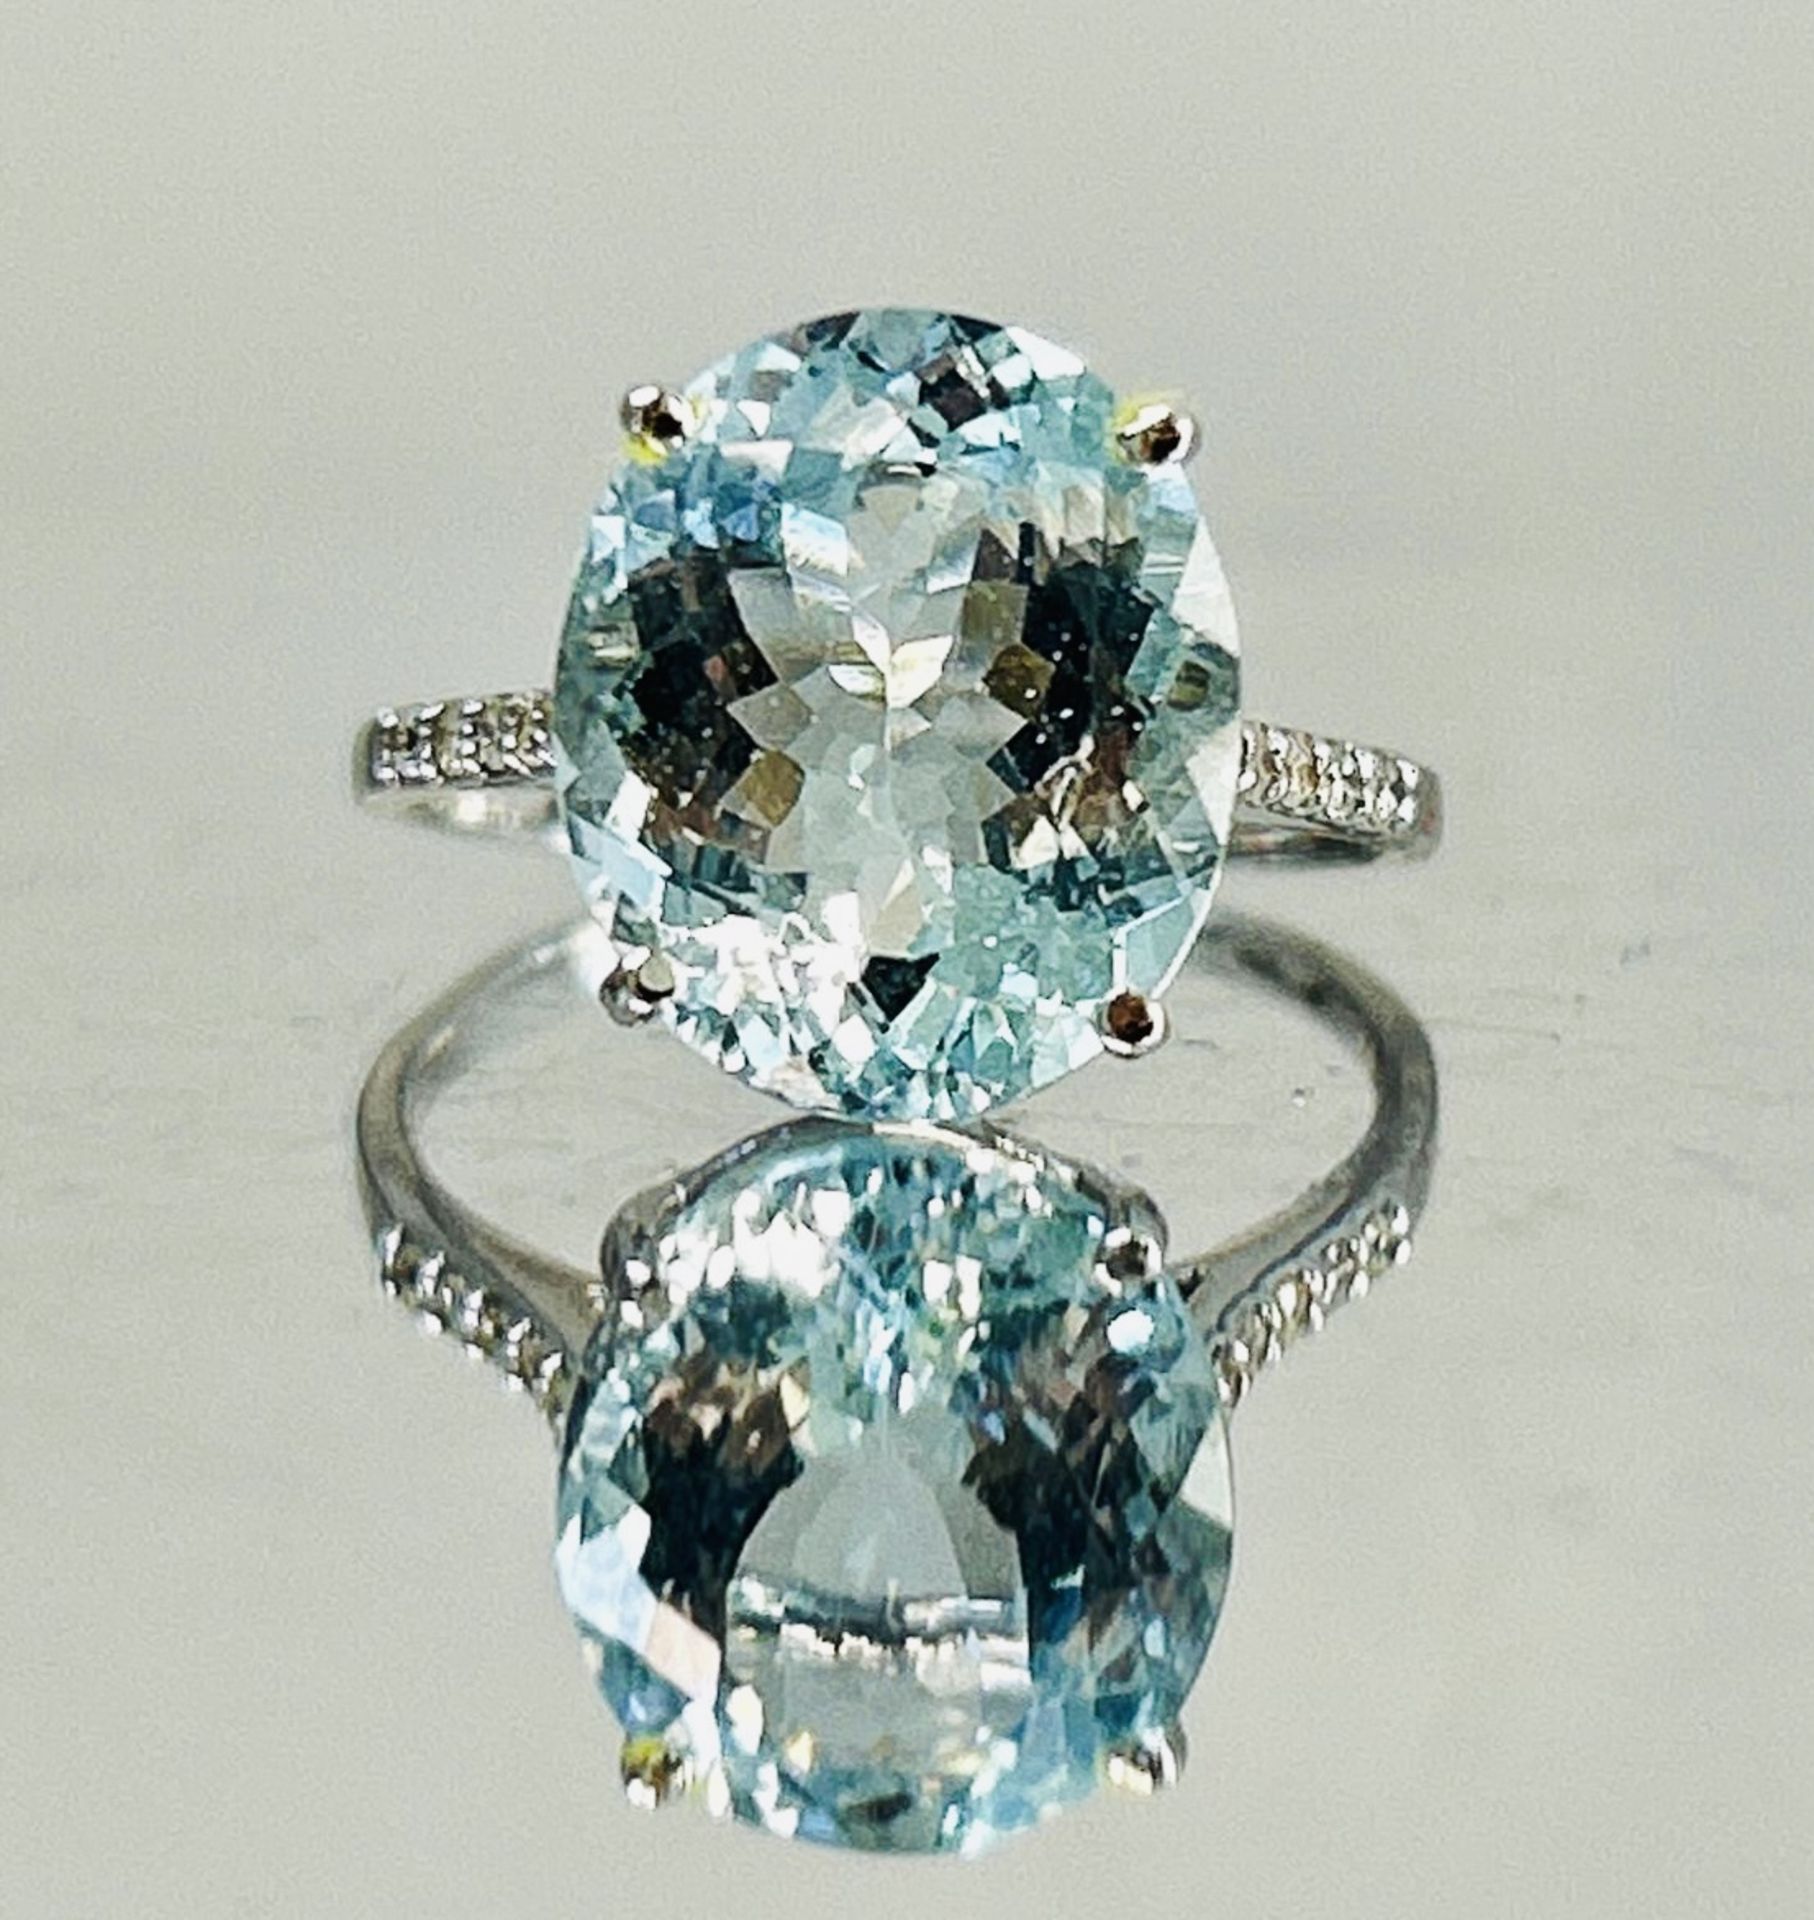 Beautiful Natural Flawless 5.81CT Aquamarine Ring With Diamonds and 18k Gold - Image 2 of 6